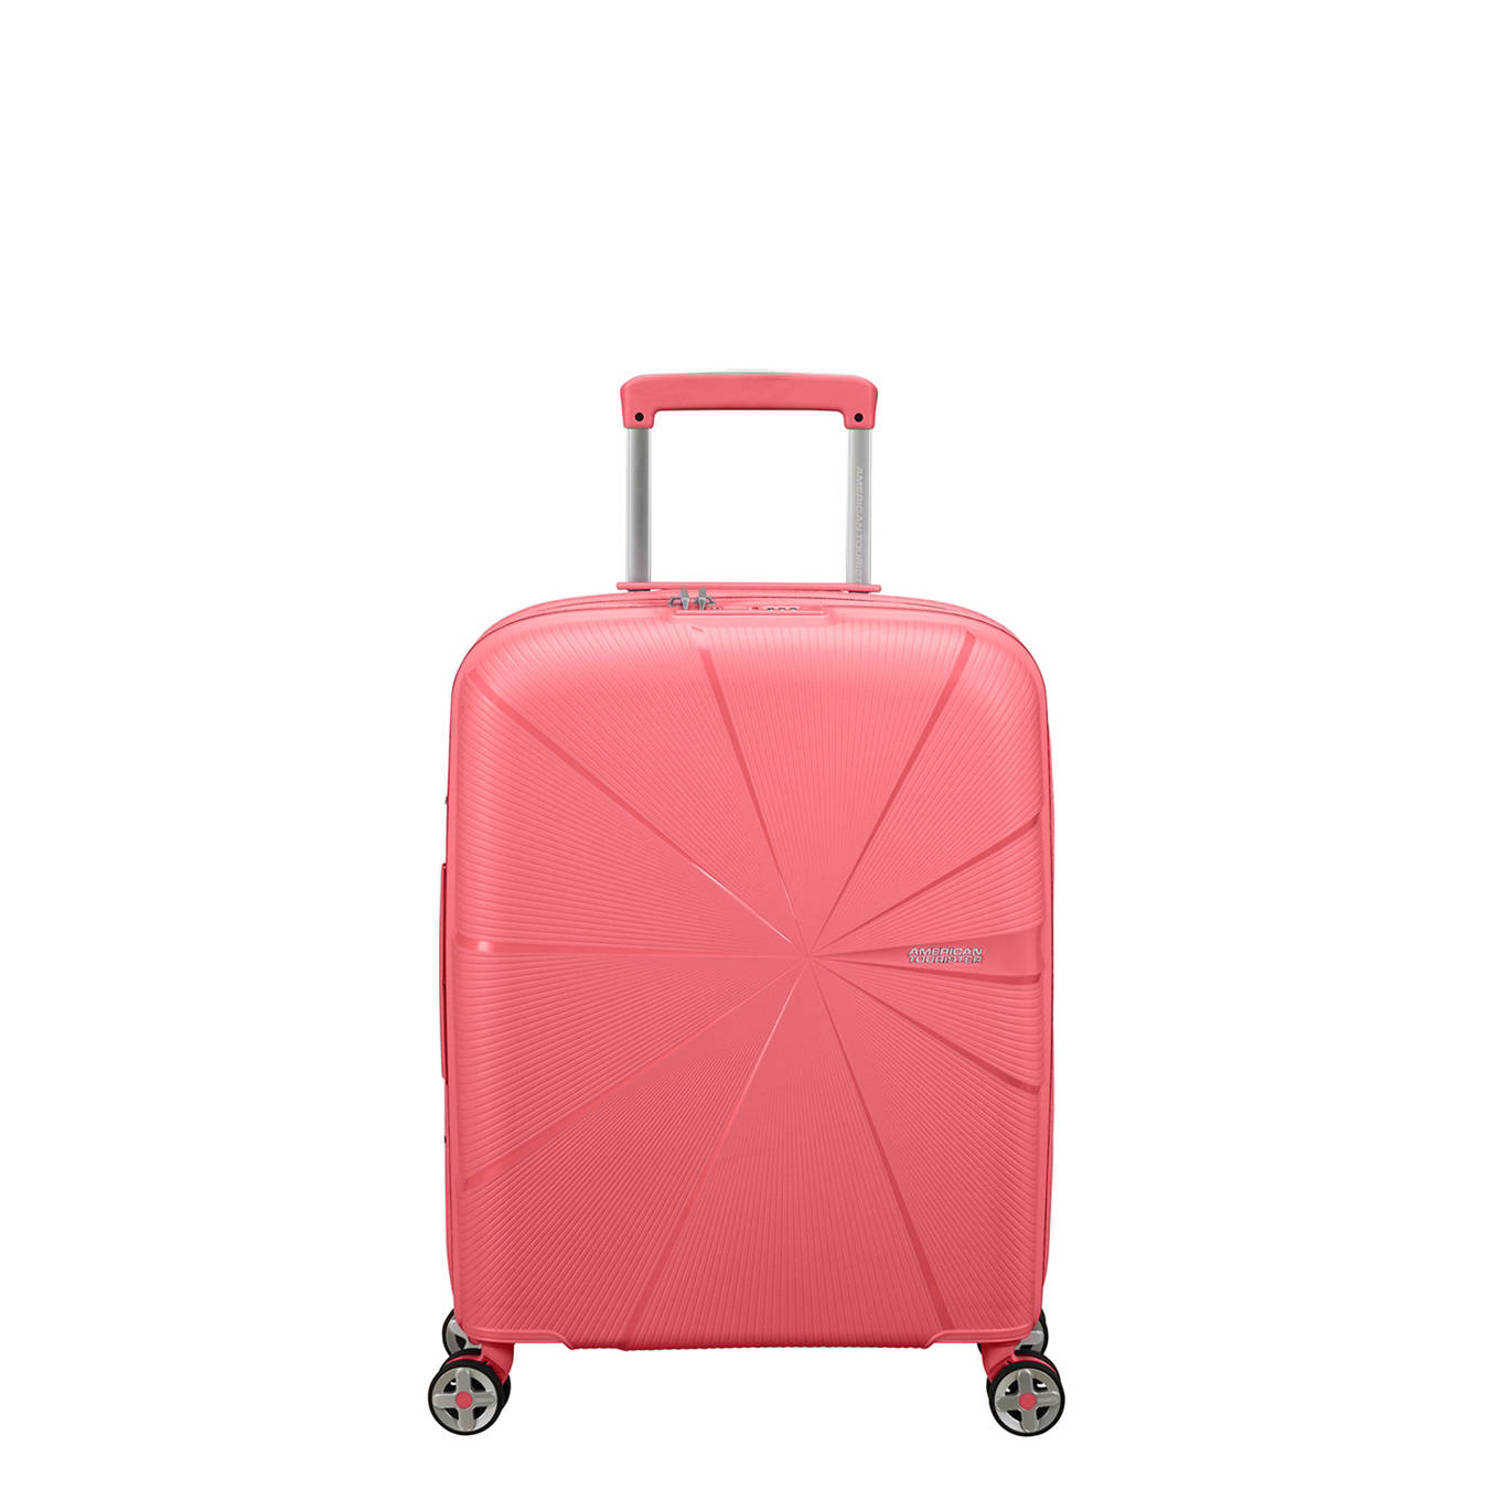 American Tourister trolley Starvibe 55 cm. Expandable roze